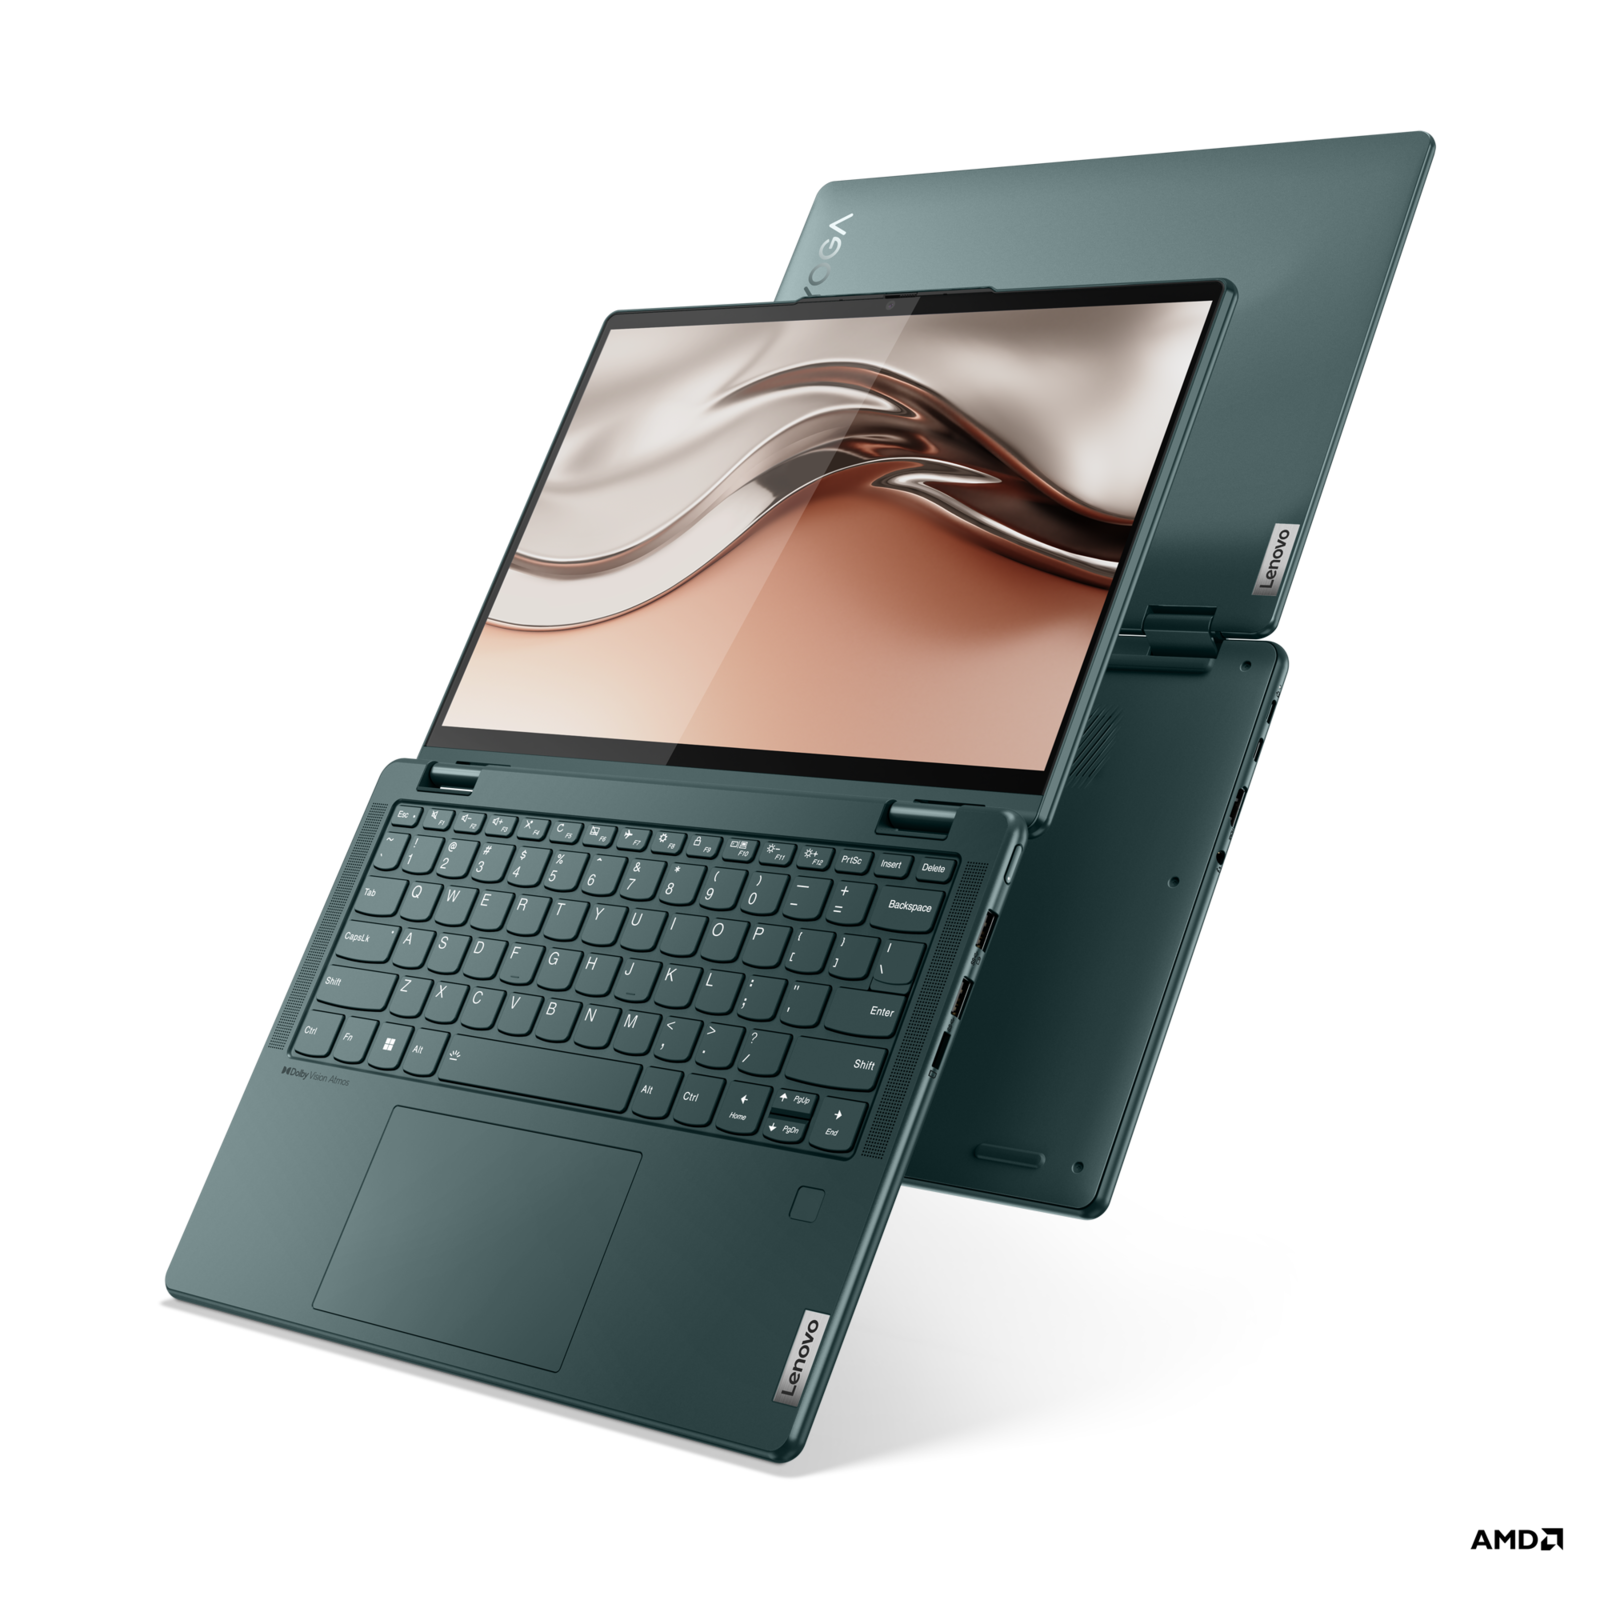 Lenovo Yoga 6 launched with a 16:10 screen and AMD Ryzen 5000 series  processors  News